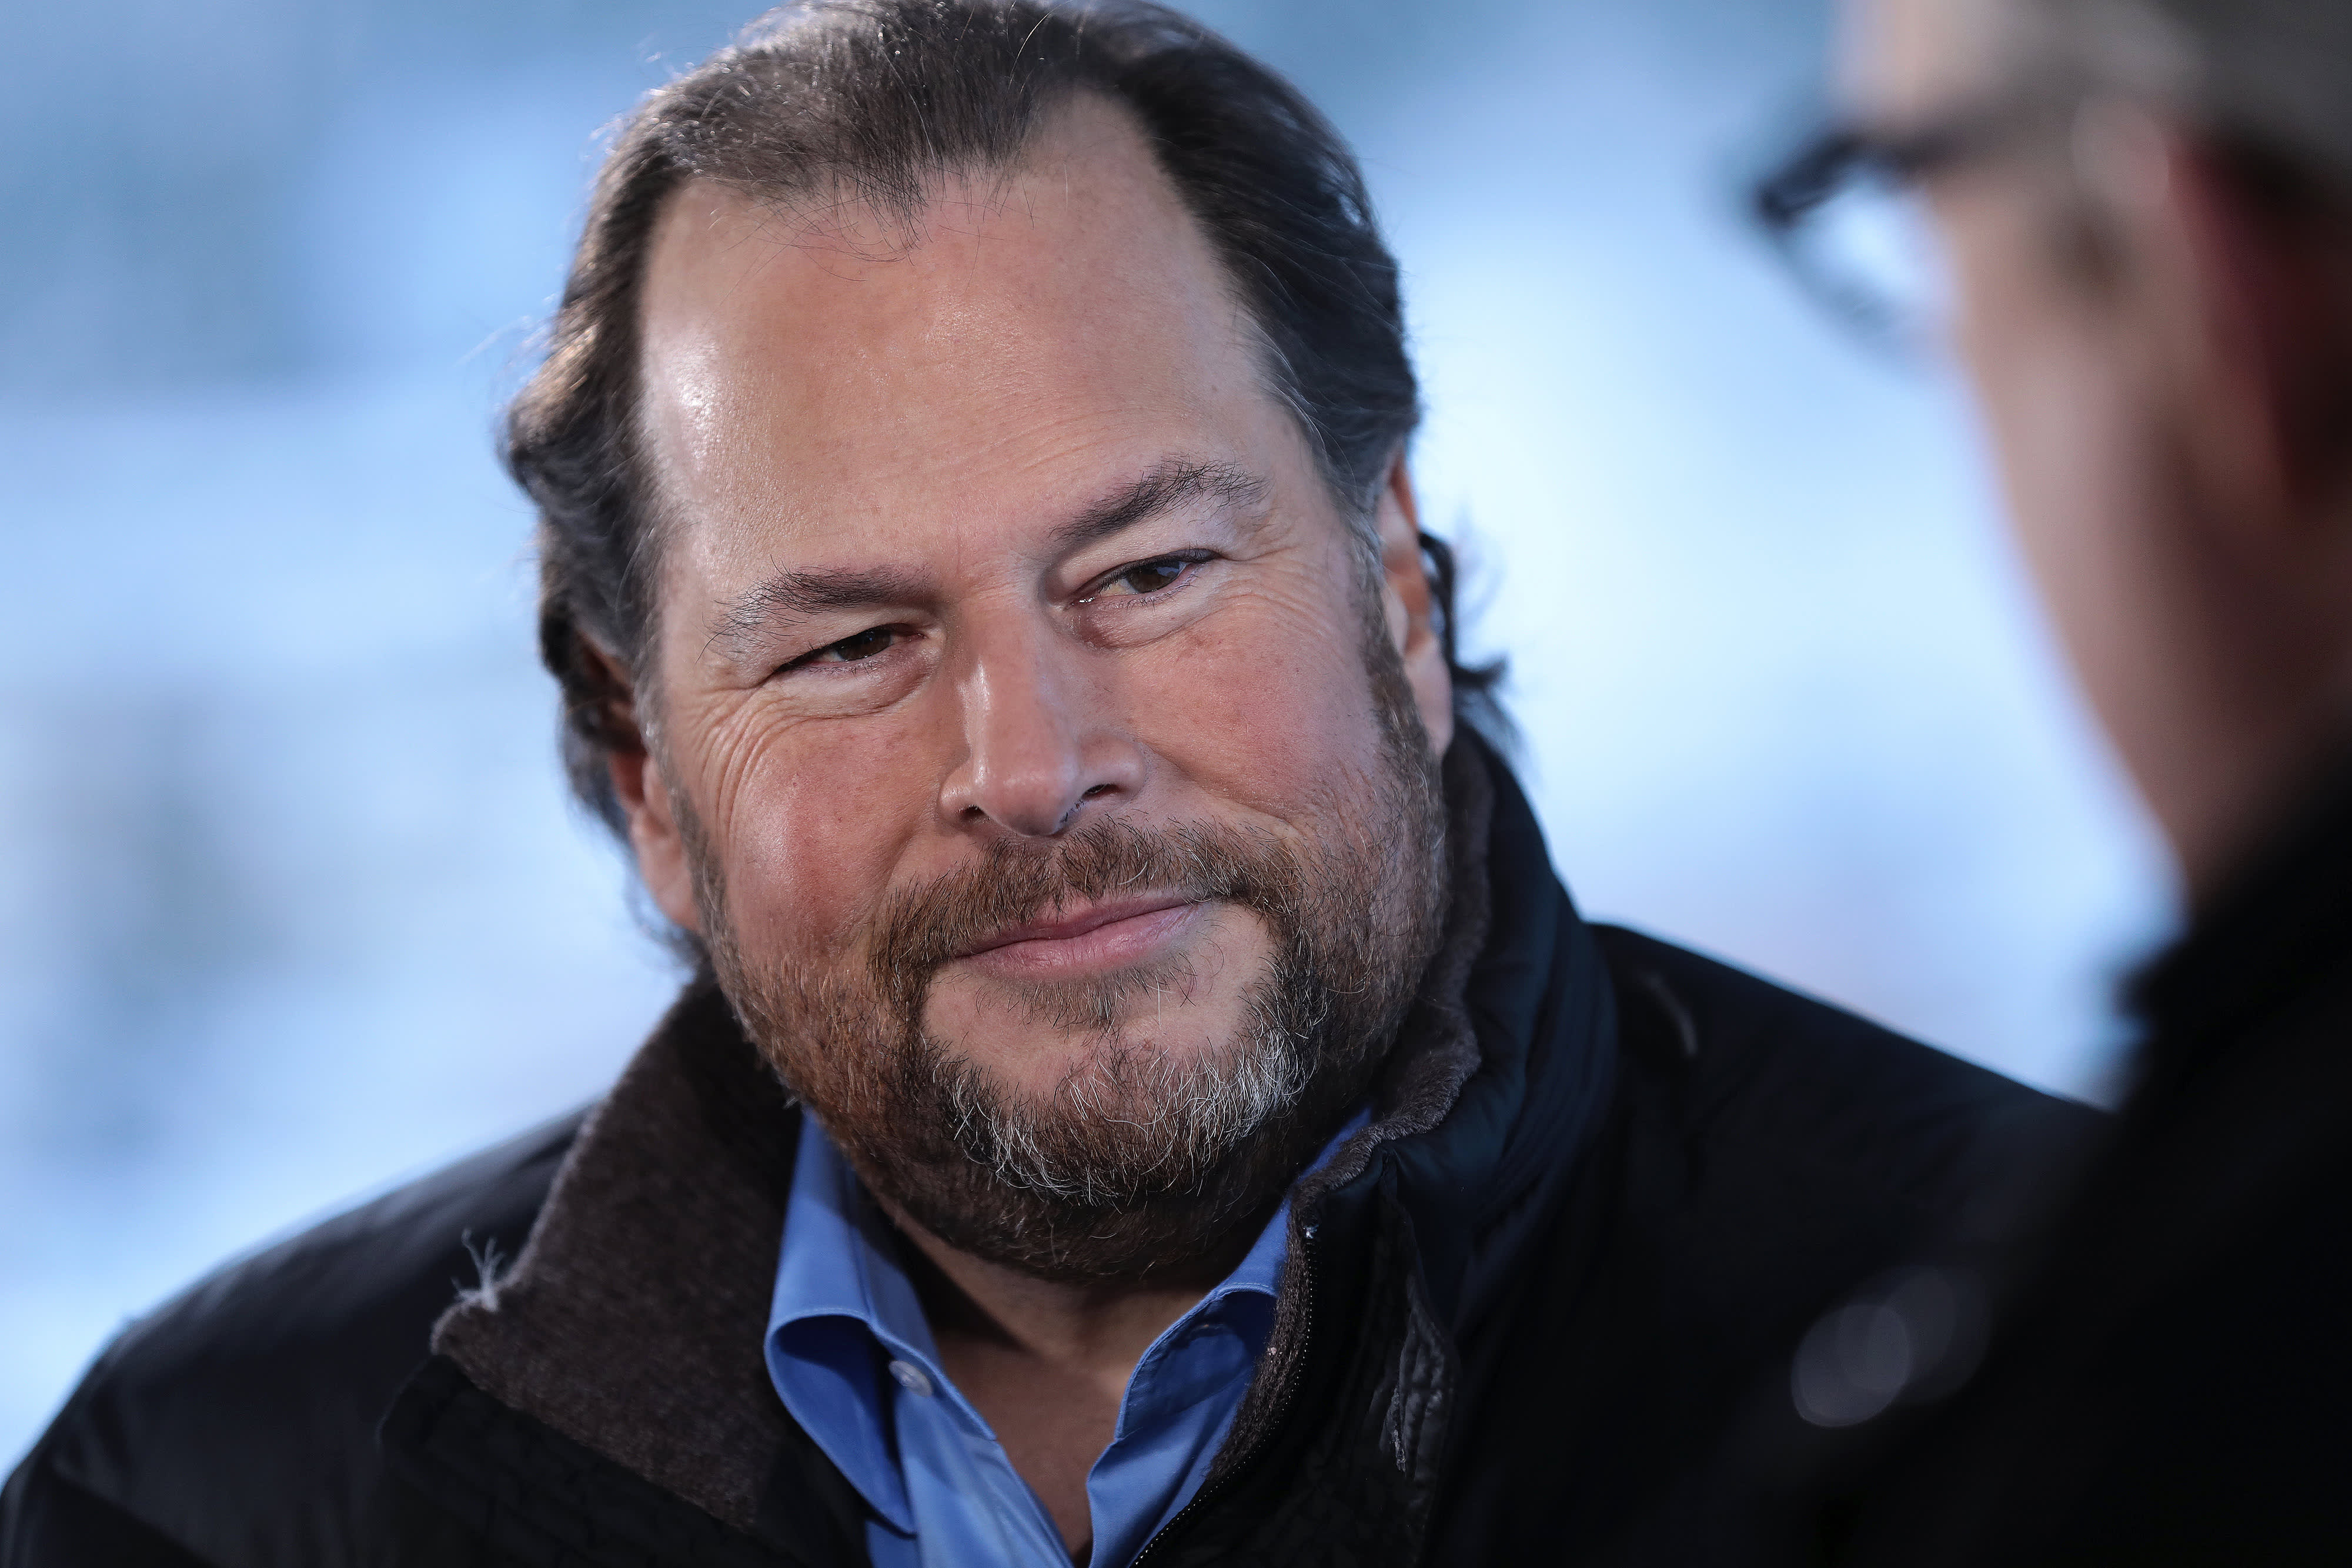 Salesforce reports better-than-expected earnings and revenue, issues upbeat guidance